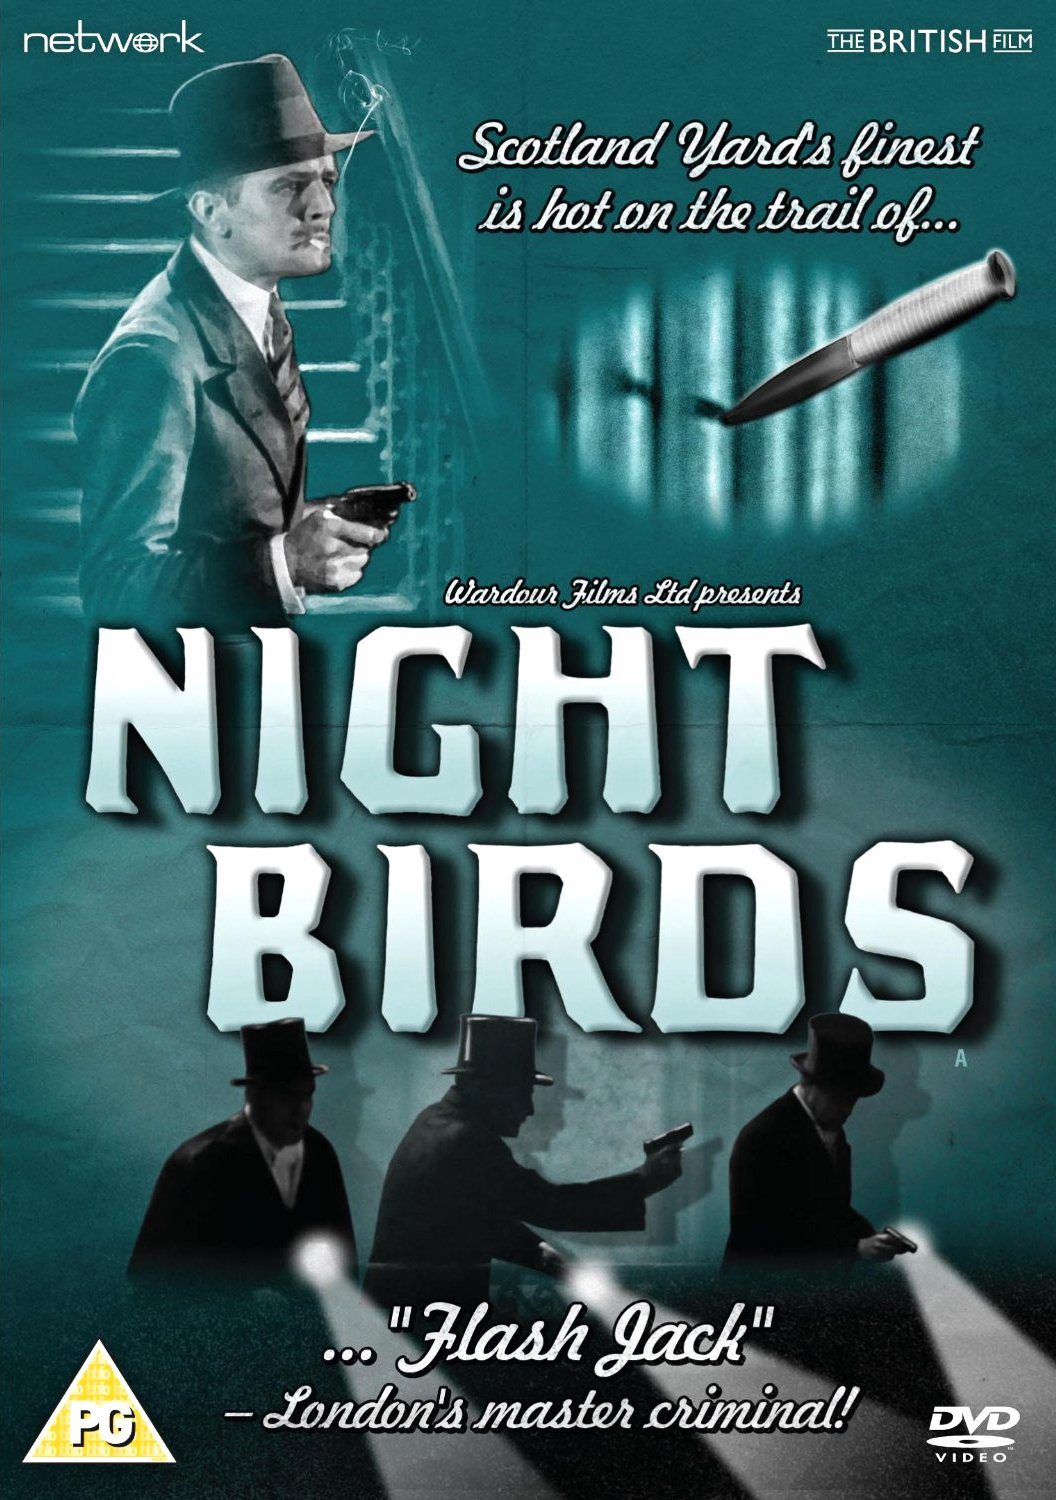 Night Birds DVD from Network and The British Film (2015).  Features Jack Raine.